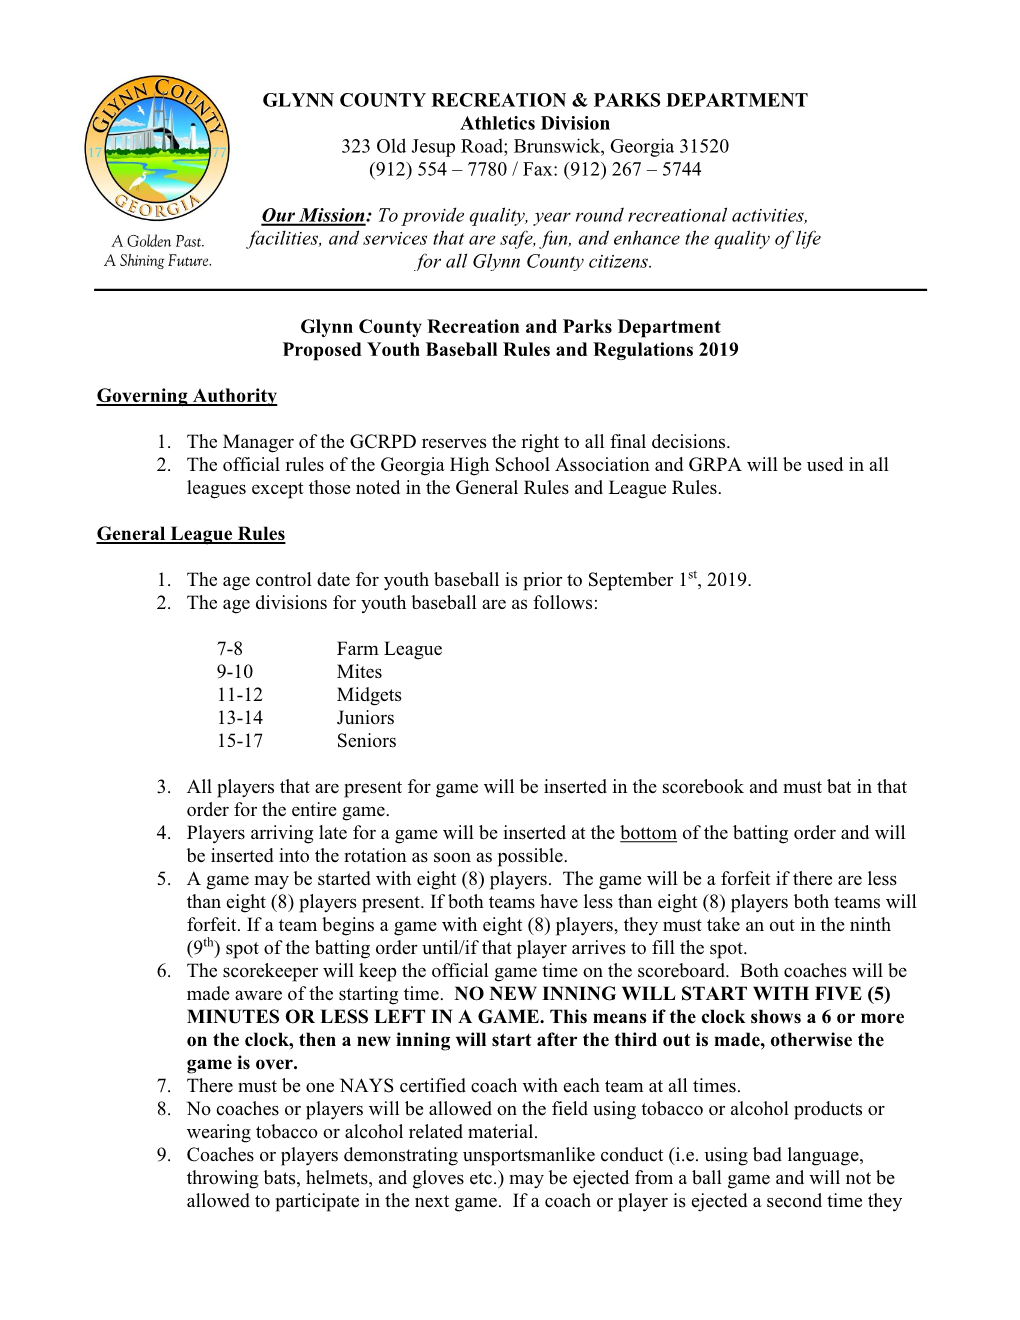 Glynn County Recreation and Parks Department Proposed Youth Baseball Rules and Regulations 2019